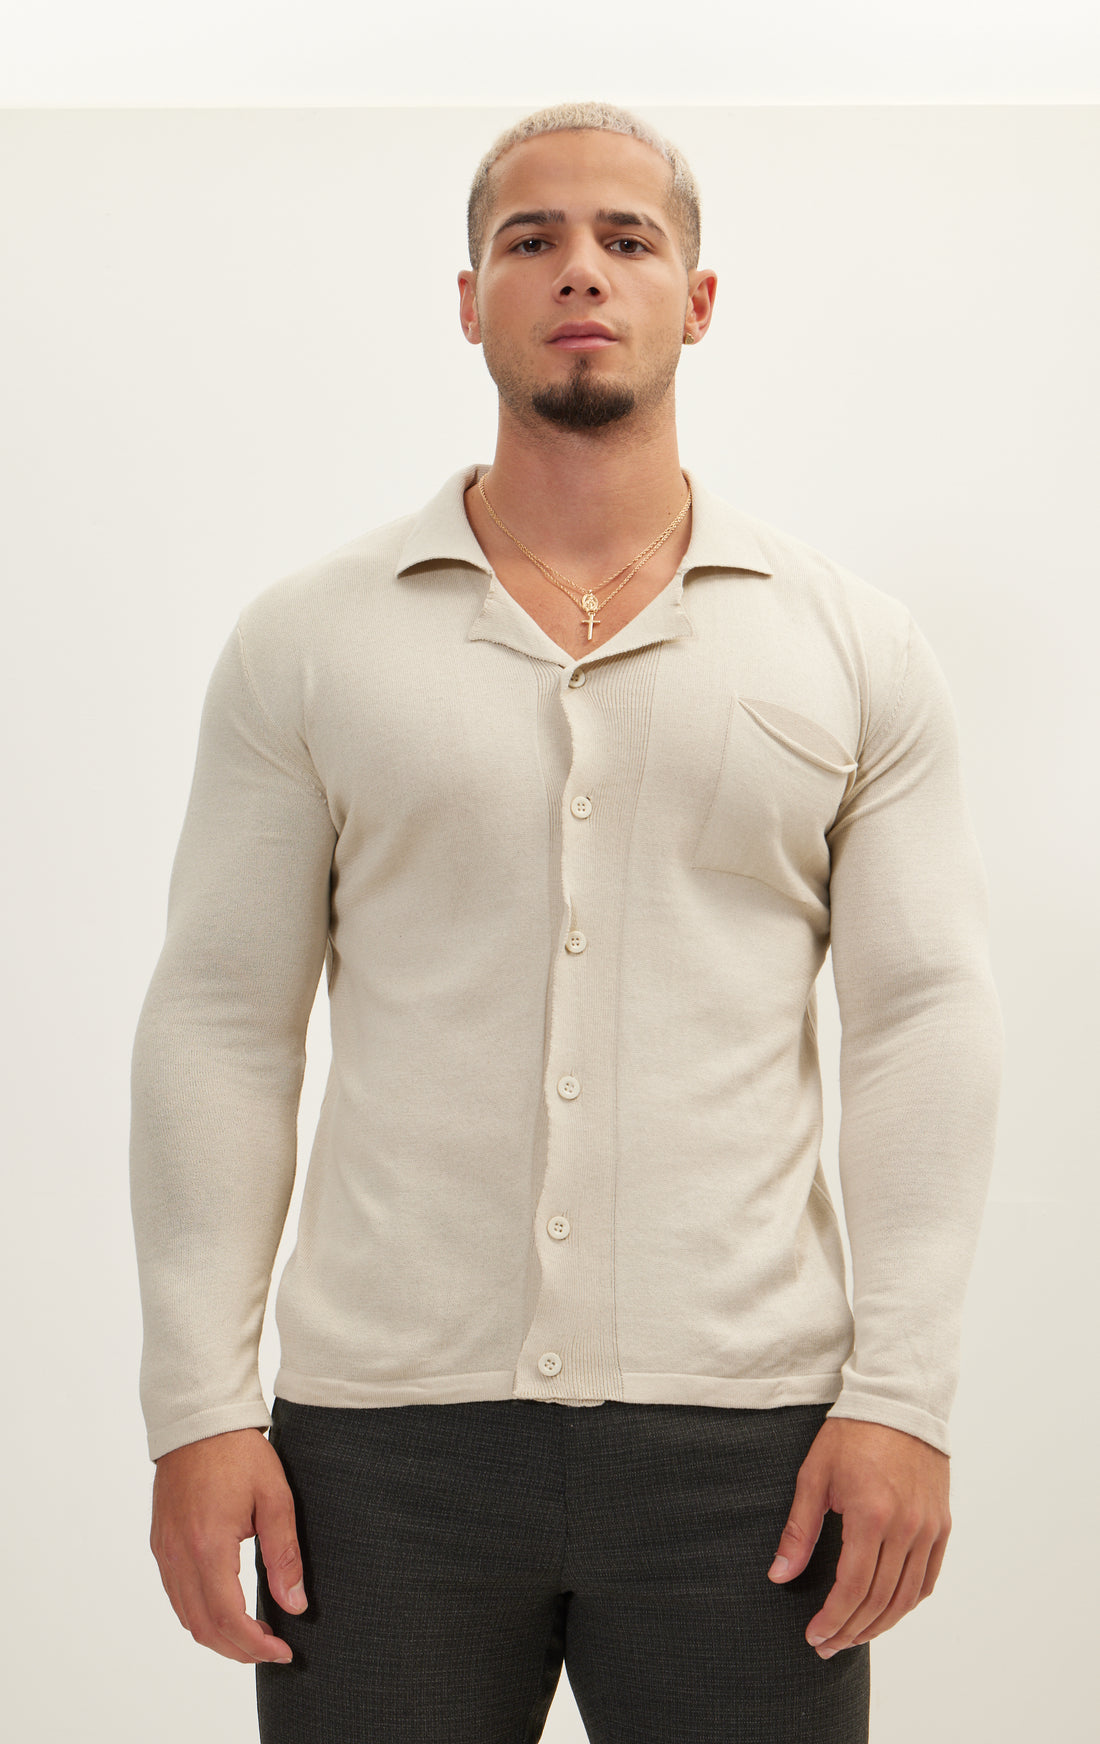 N° 6403 LONG SLEEVE KNIT BUTTON DOWN - STONE